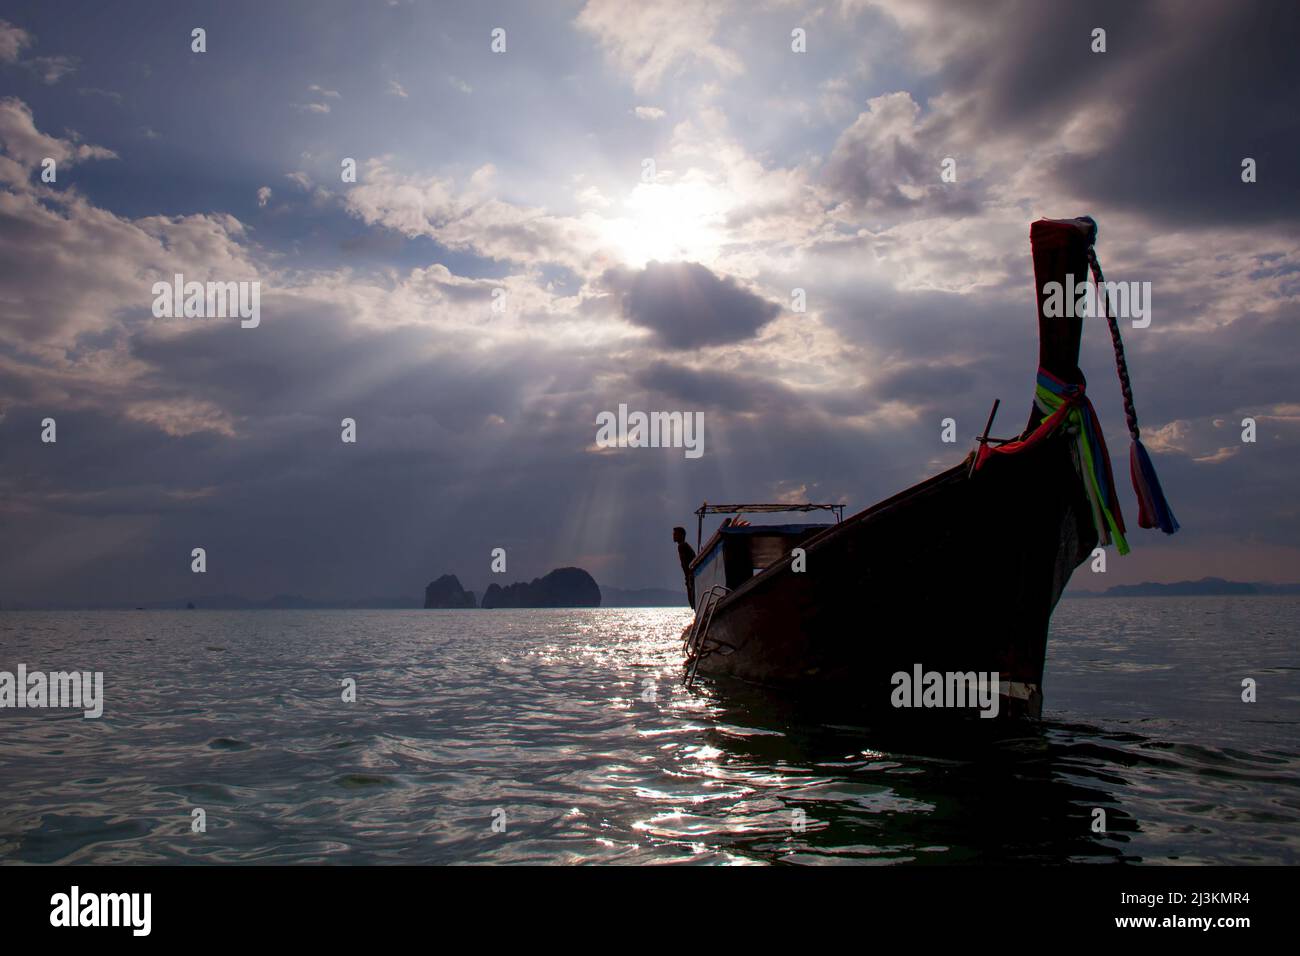 A man leans off of a long tail boat in the Andaman sea under rays of light. Stock Photo